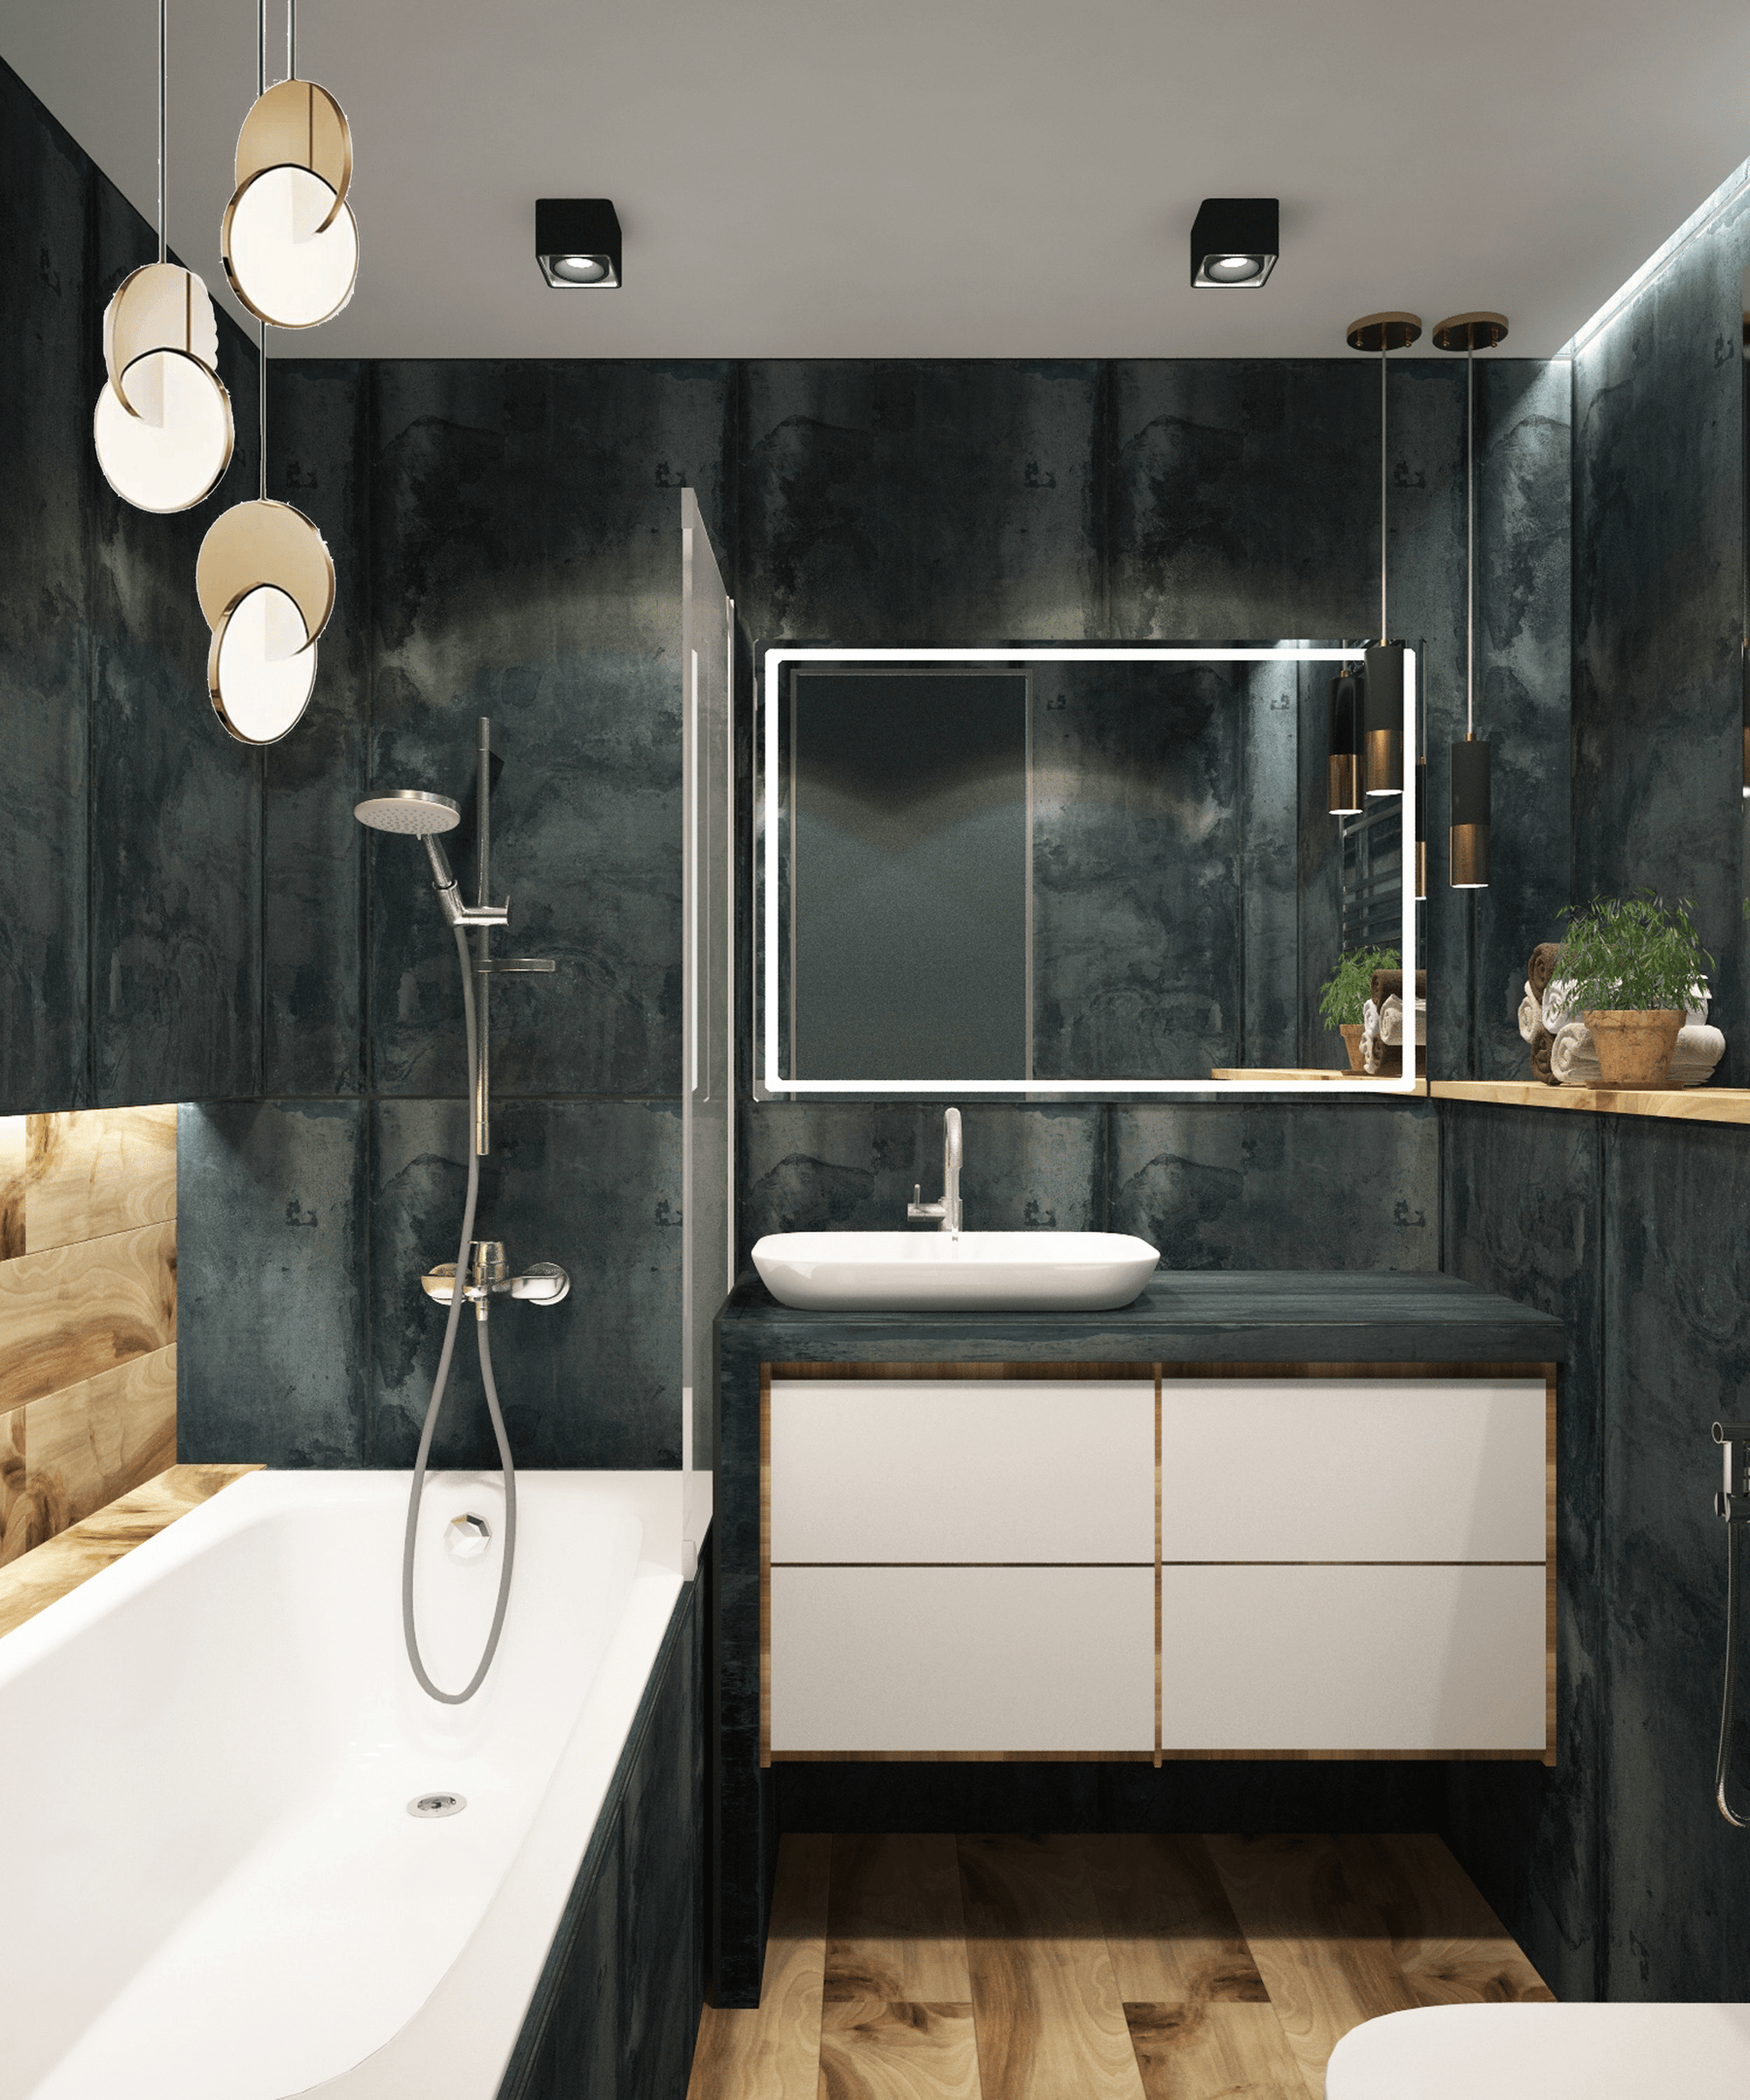 How to choose the best lighting for bathroom